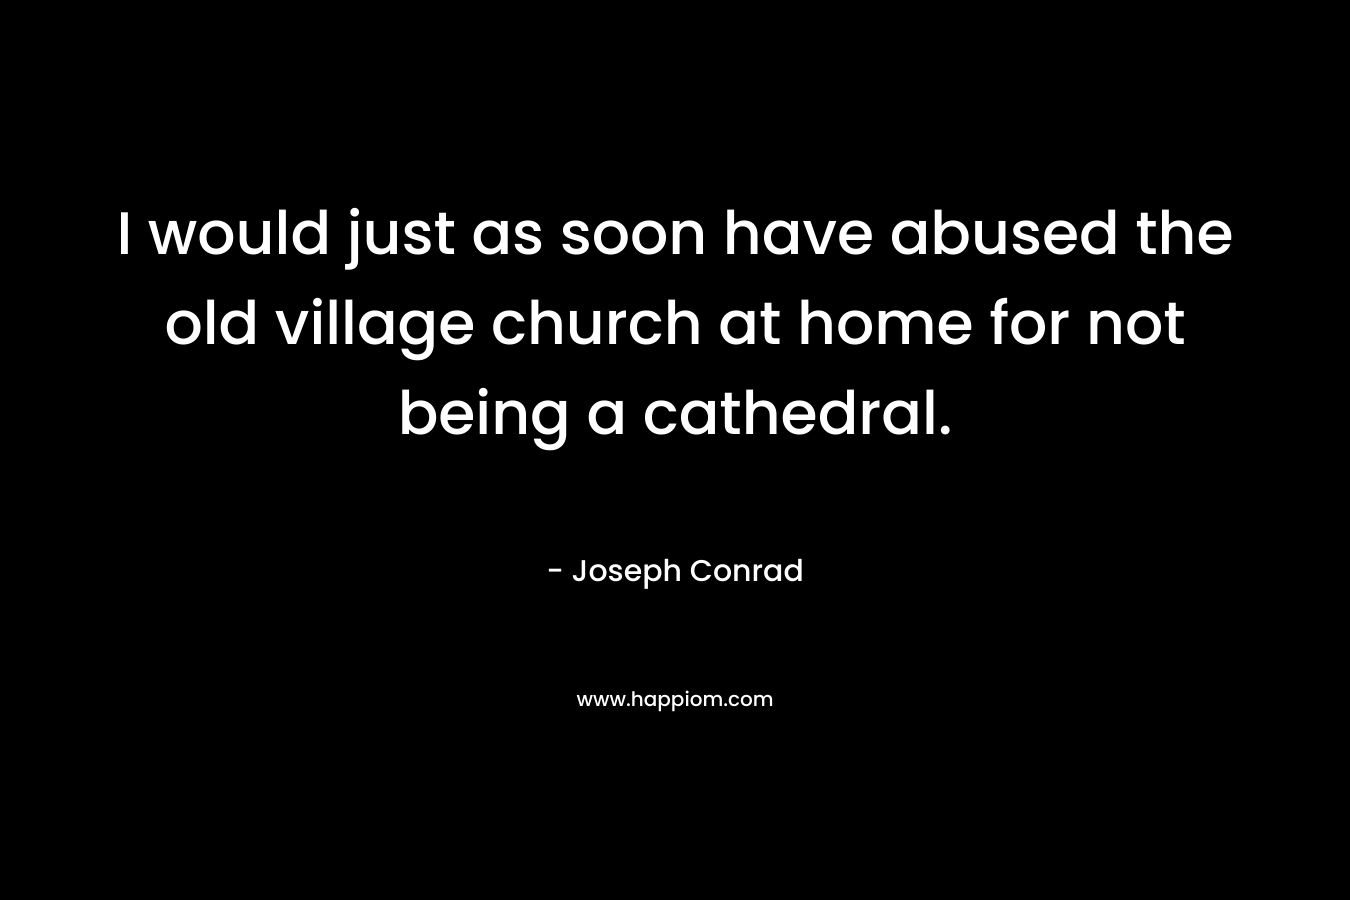 I would just as soon have abused the old village church at home for not being a cathedral. – Joseph Conrad